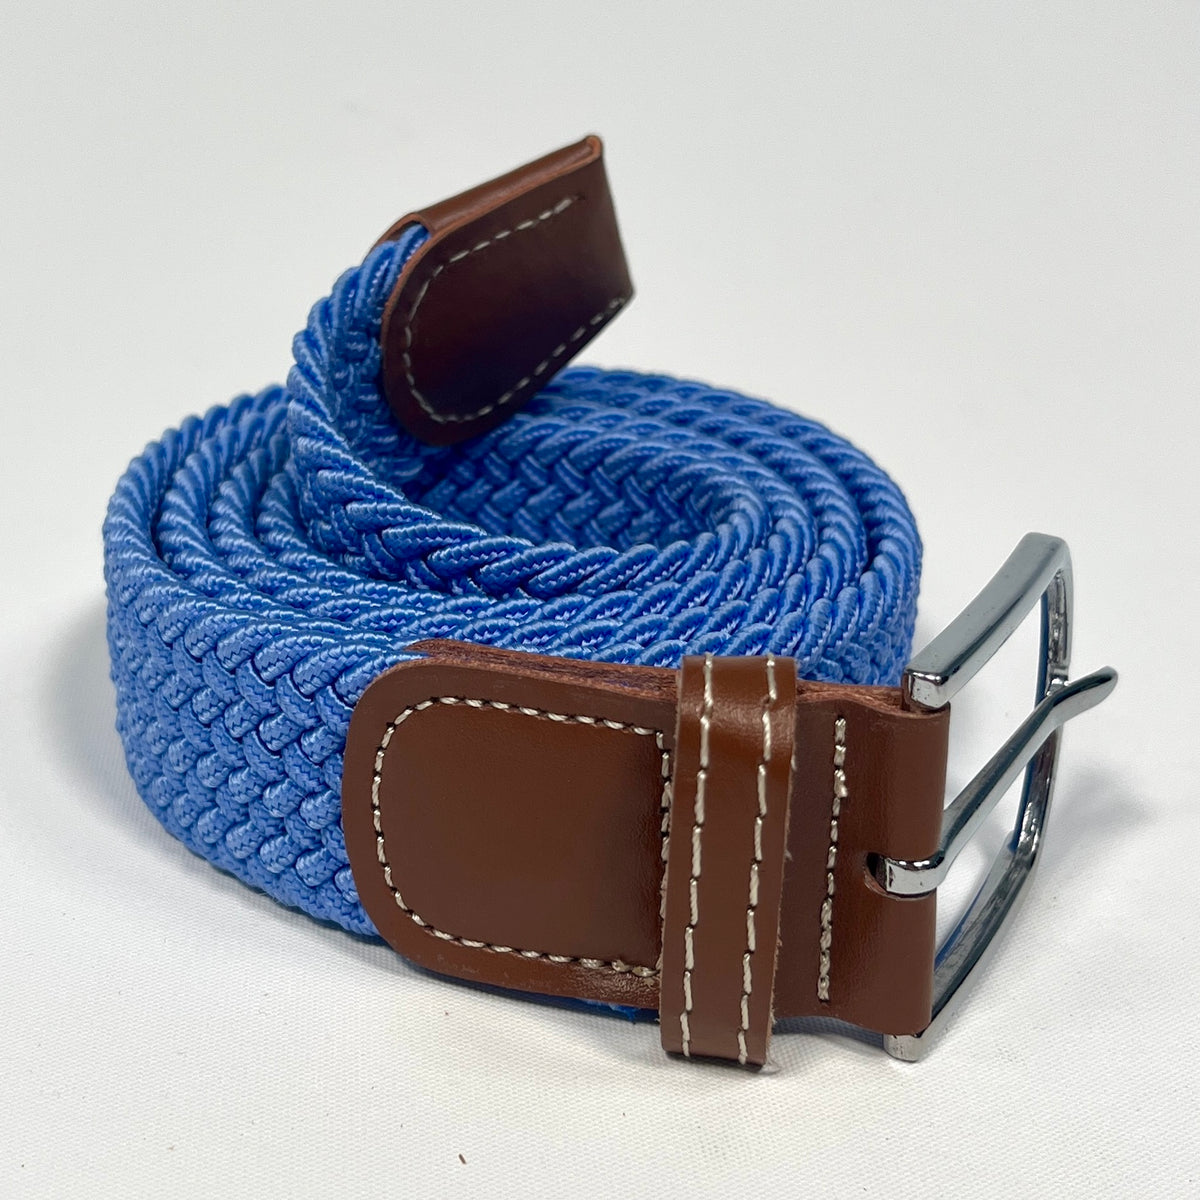 Periwinkle blue elastic belt with silver buckle and brown leather ends.